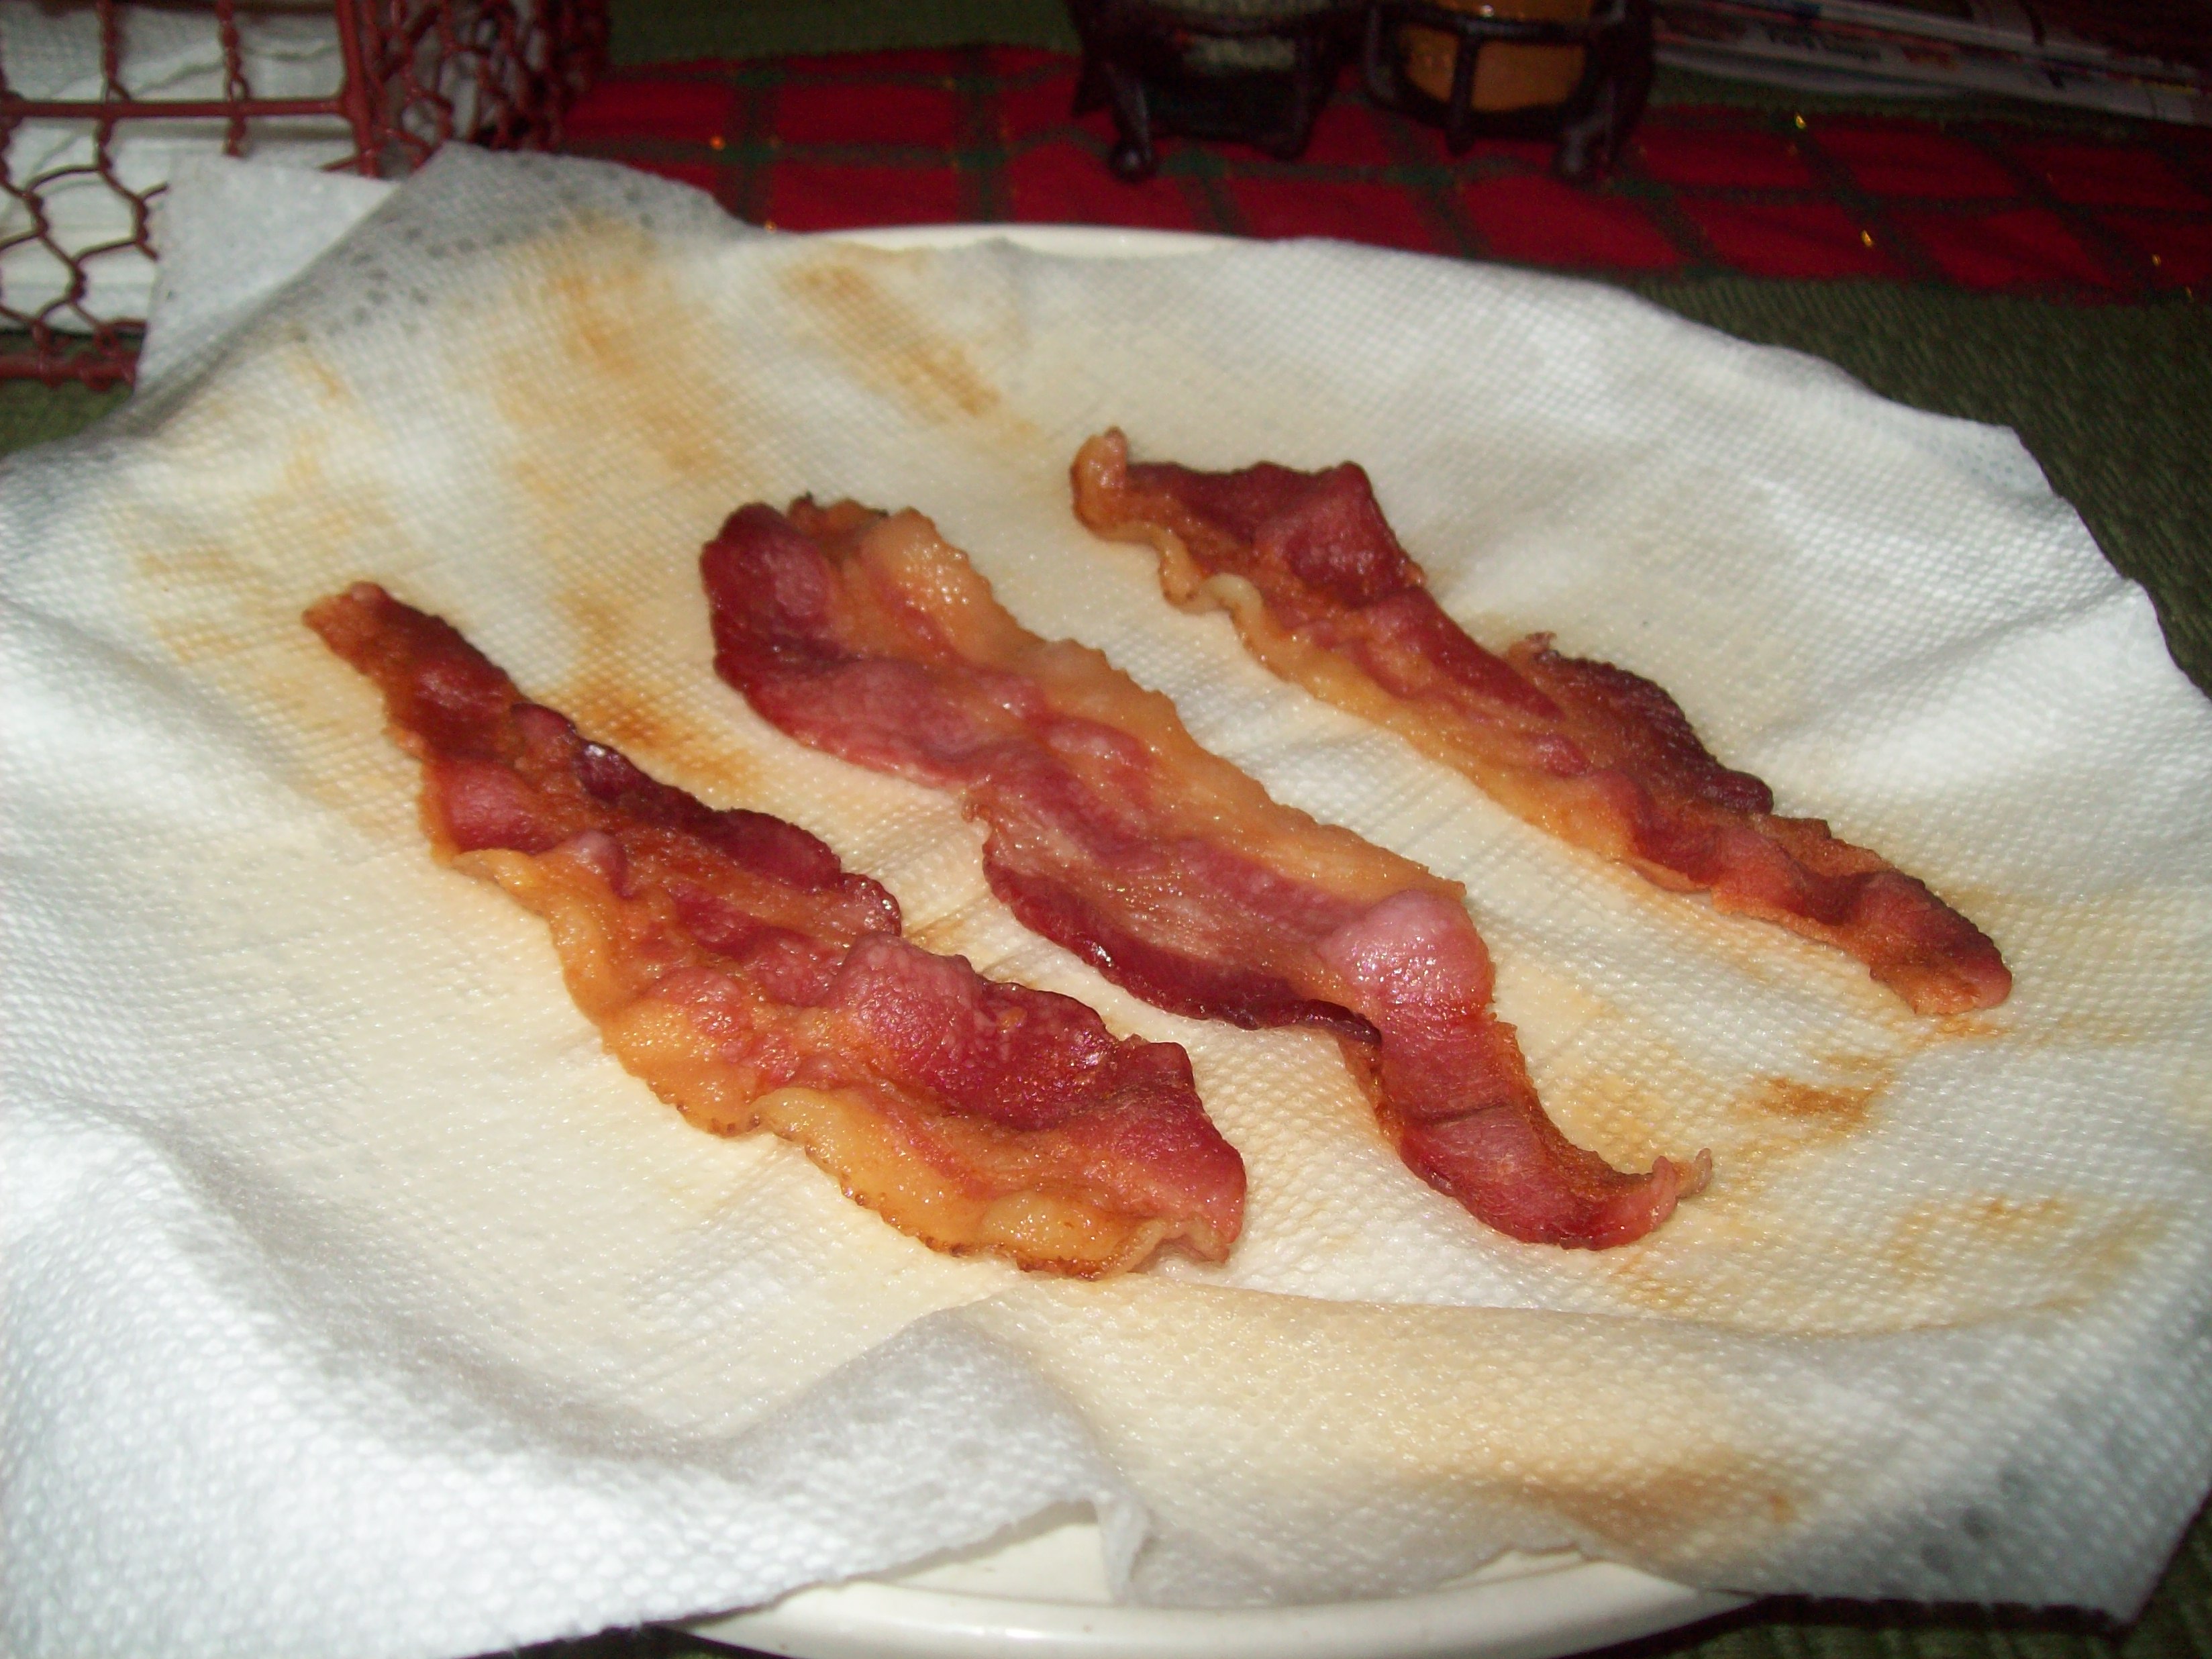 How to Microwave Bacon